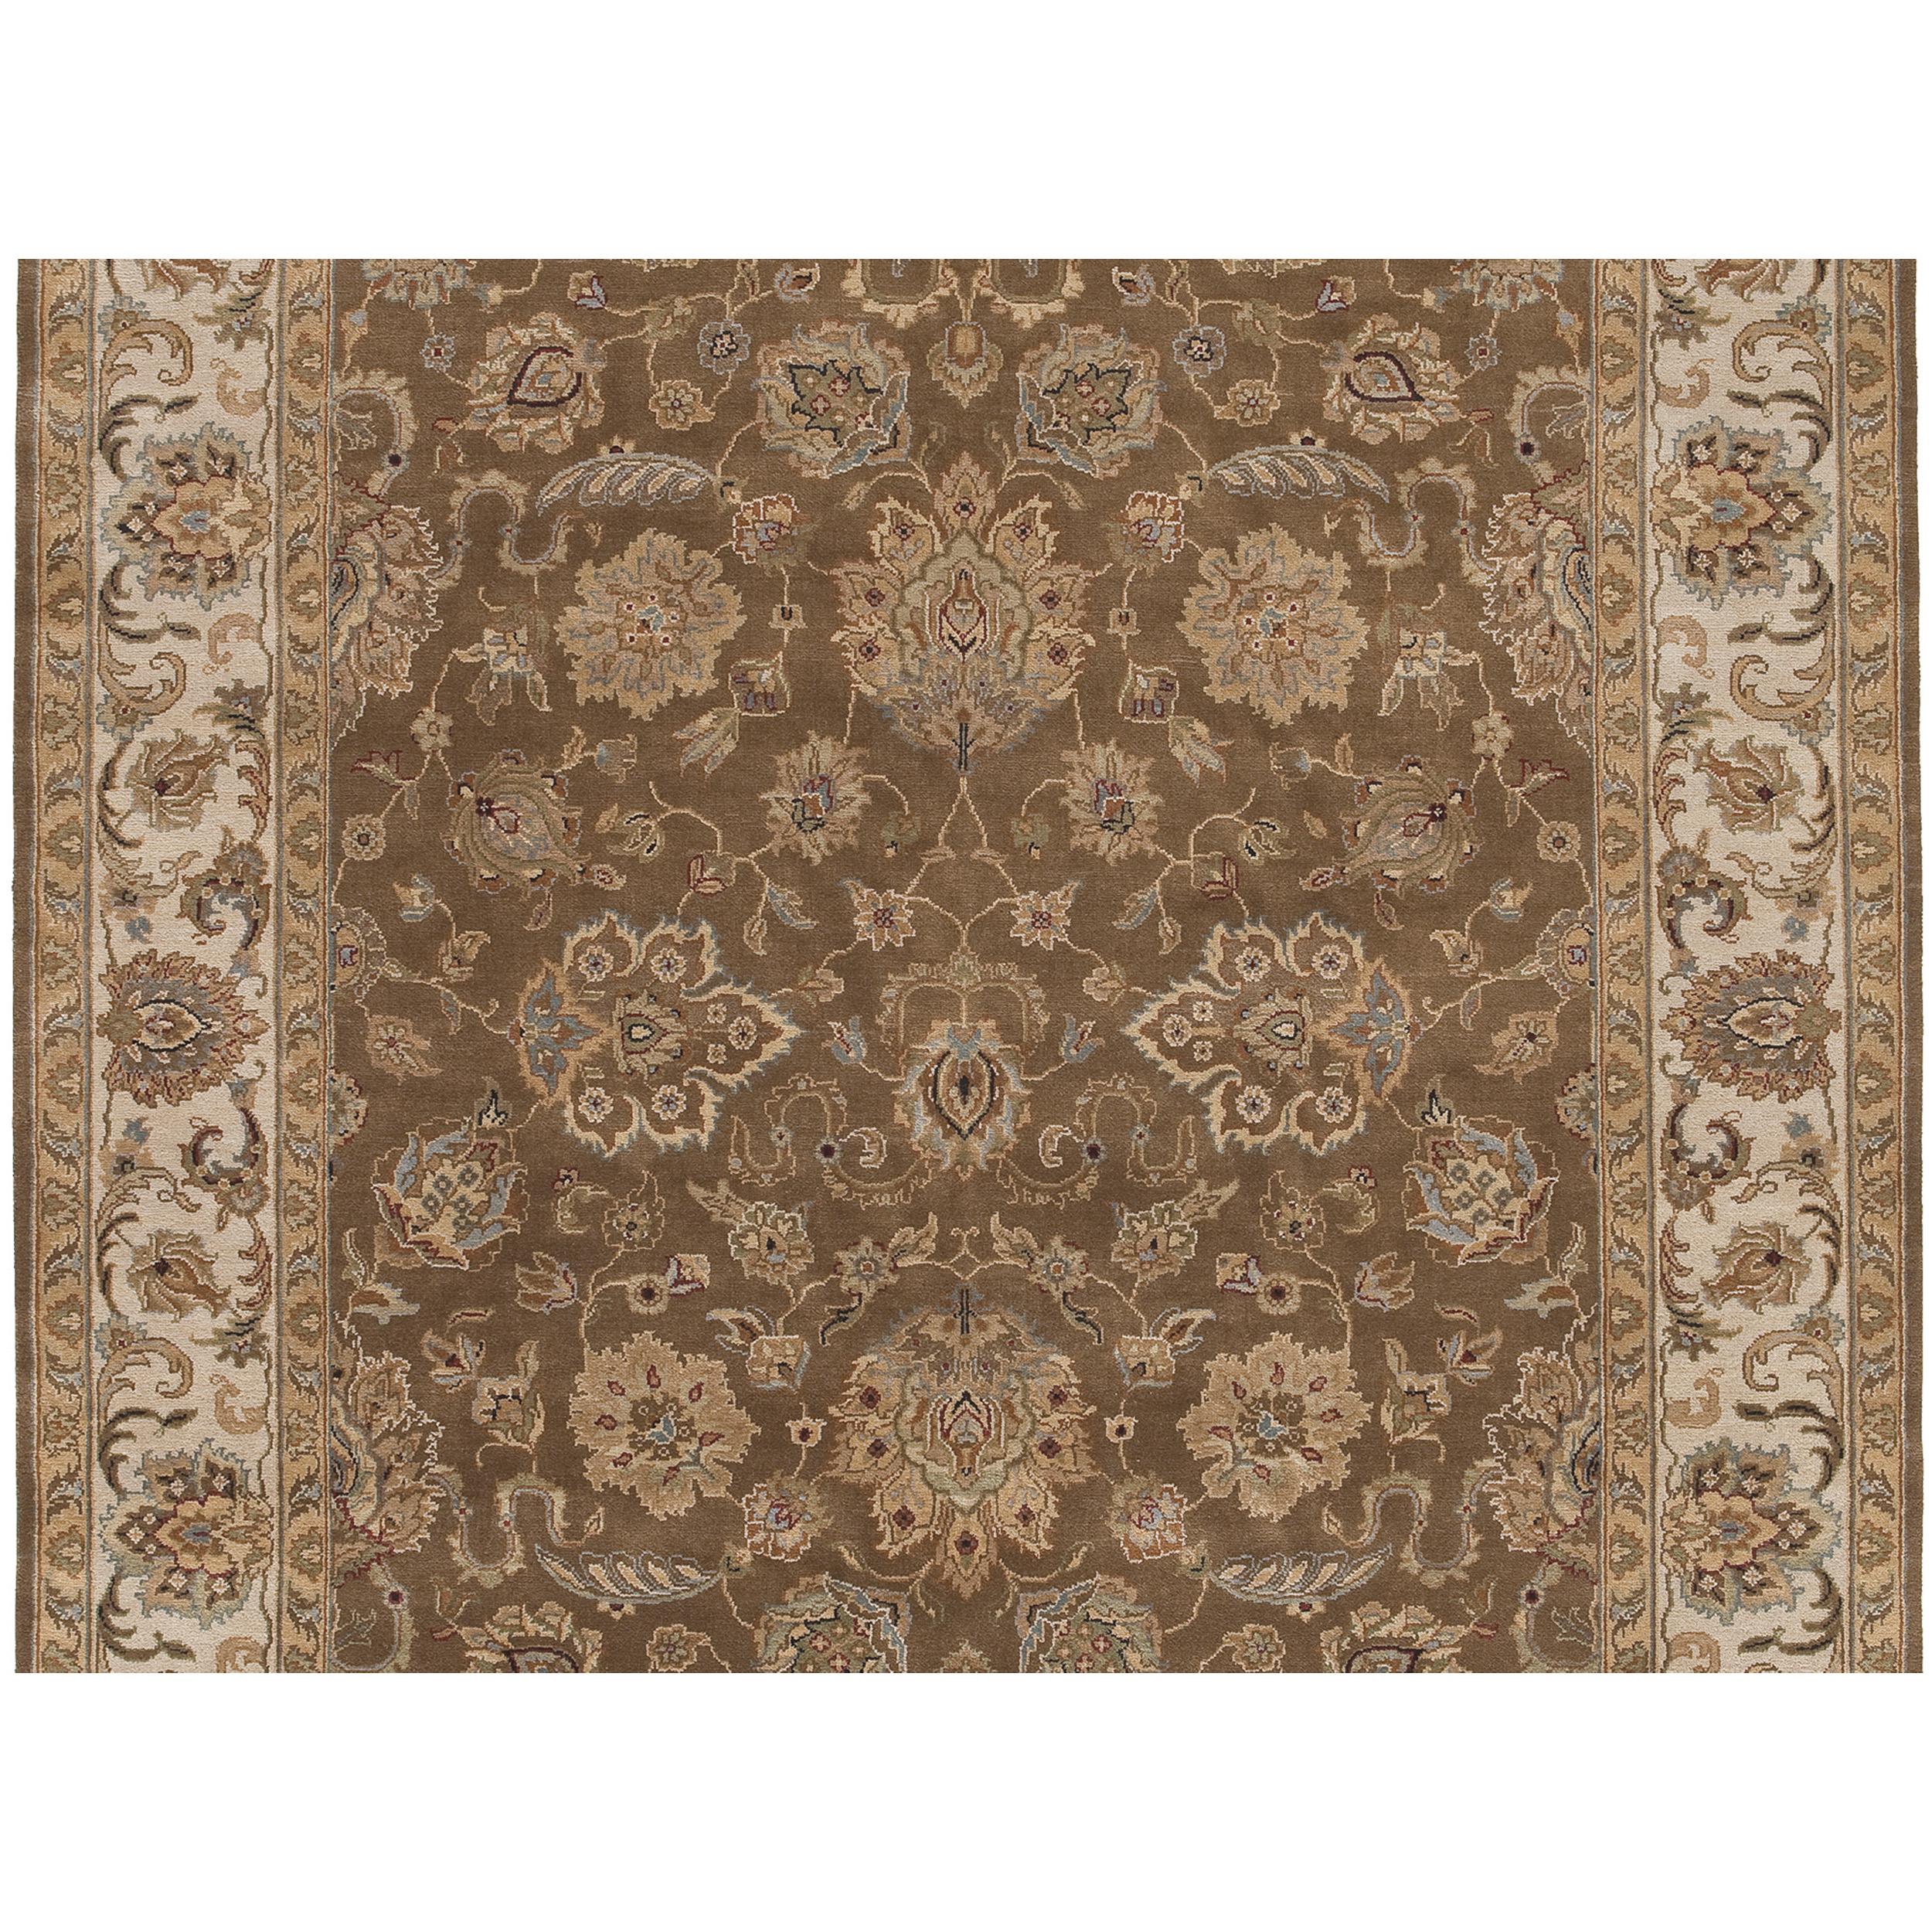 Luxury Traditional Hand-Knotted Agra Fennel and Cream 10X14 Rug In New Condition For Sale In Secaucus, NJ